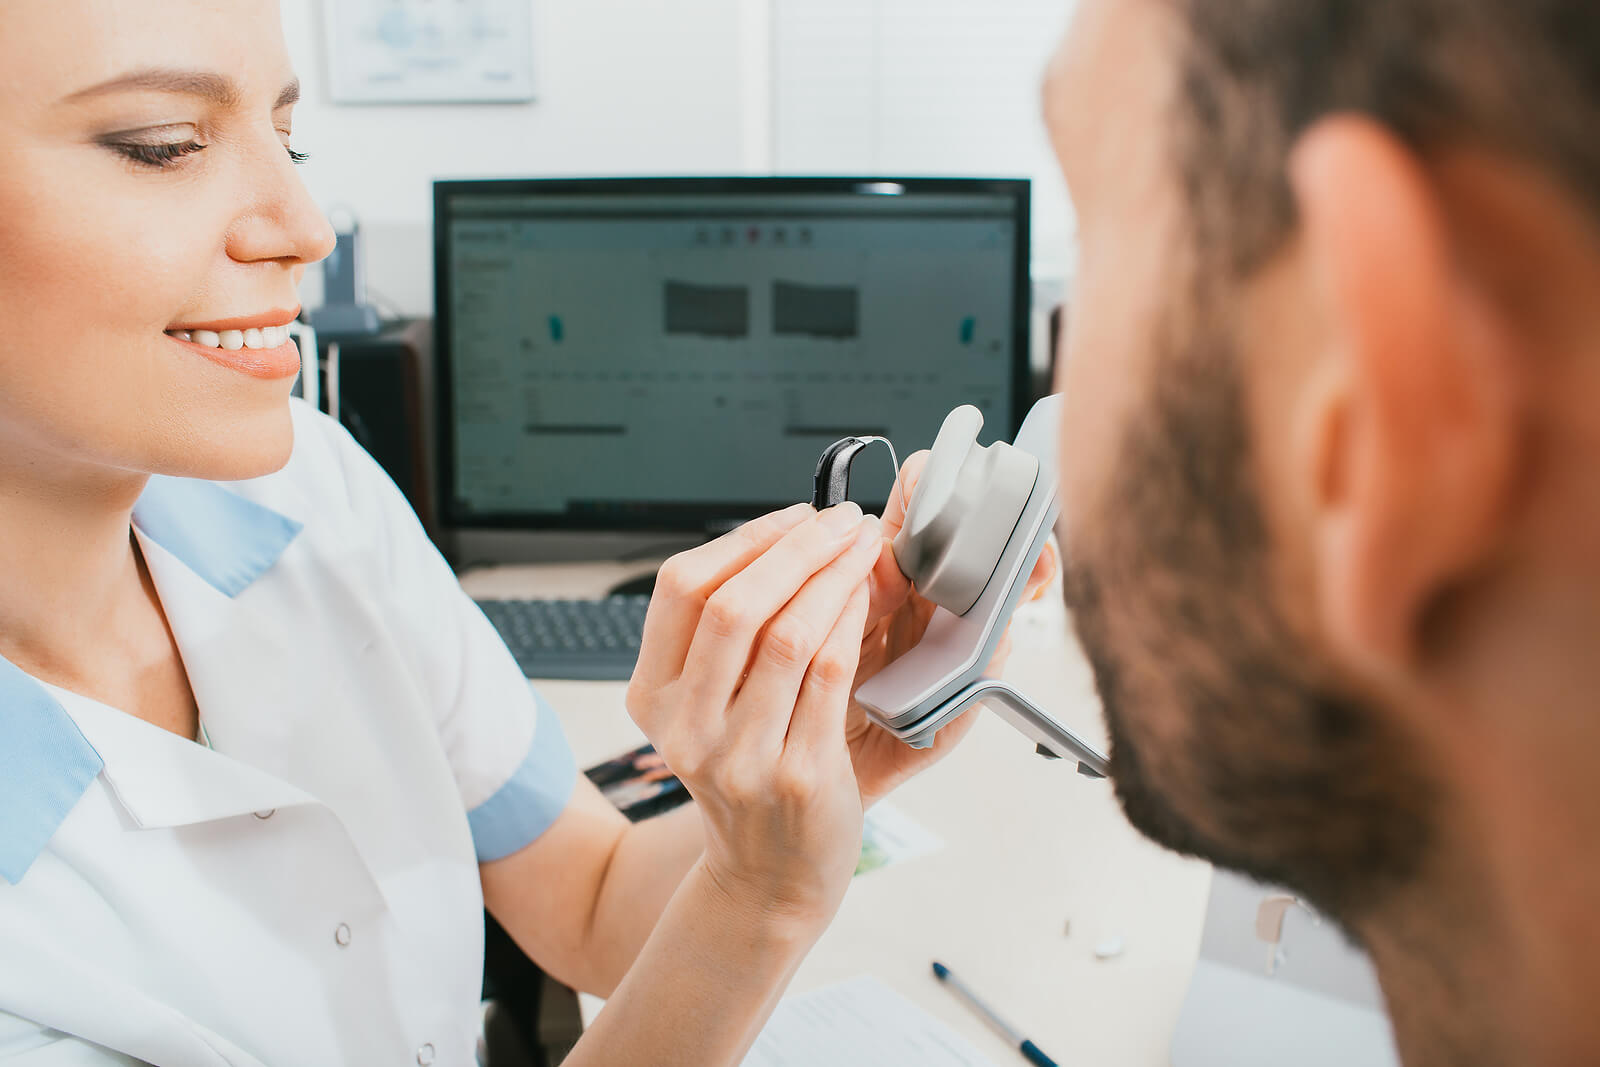 Hearing Instrument Specialist showing patient a hearing aid